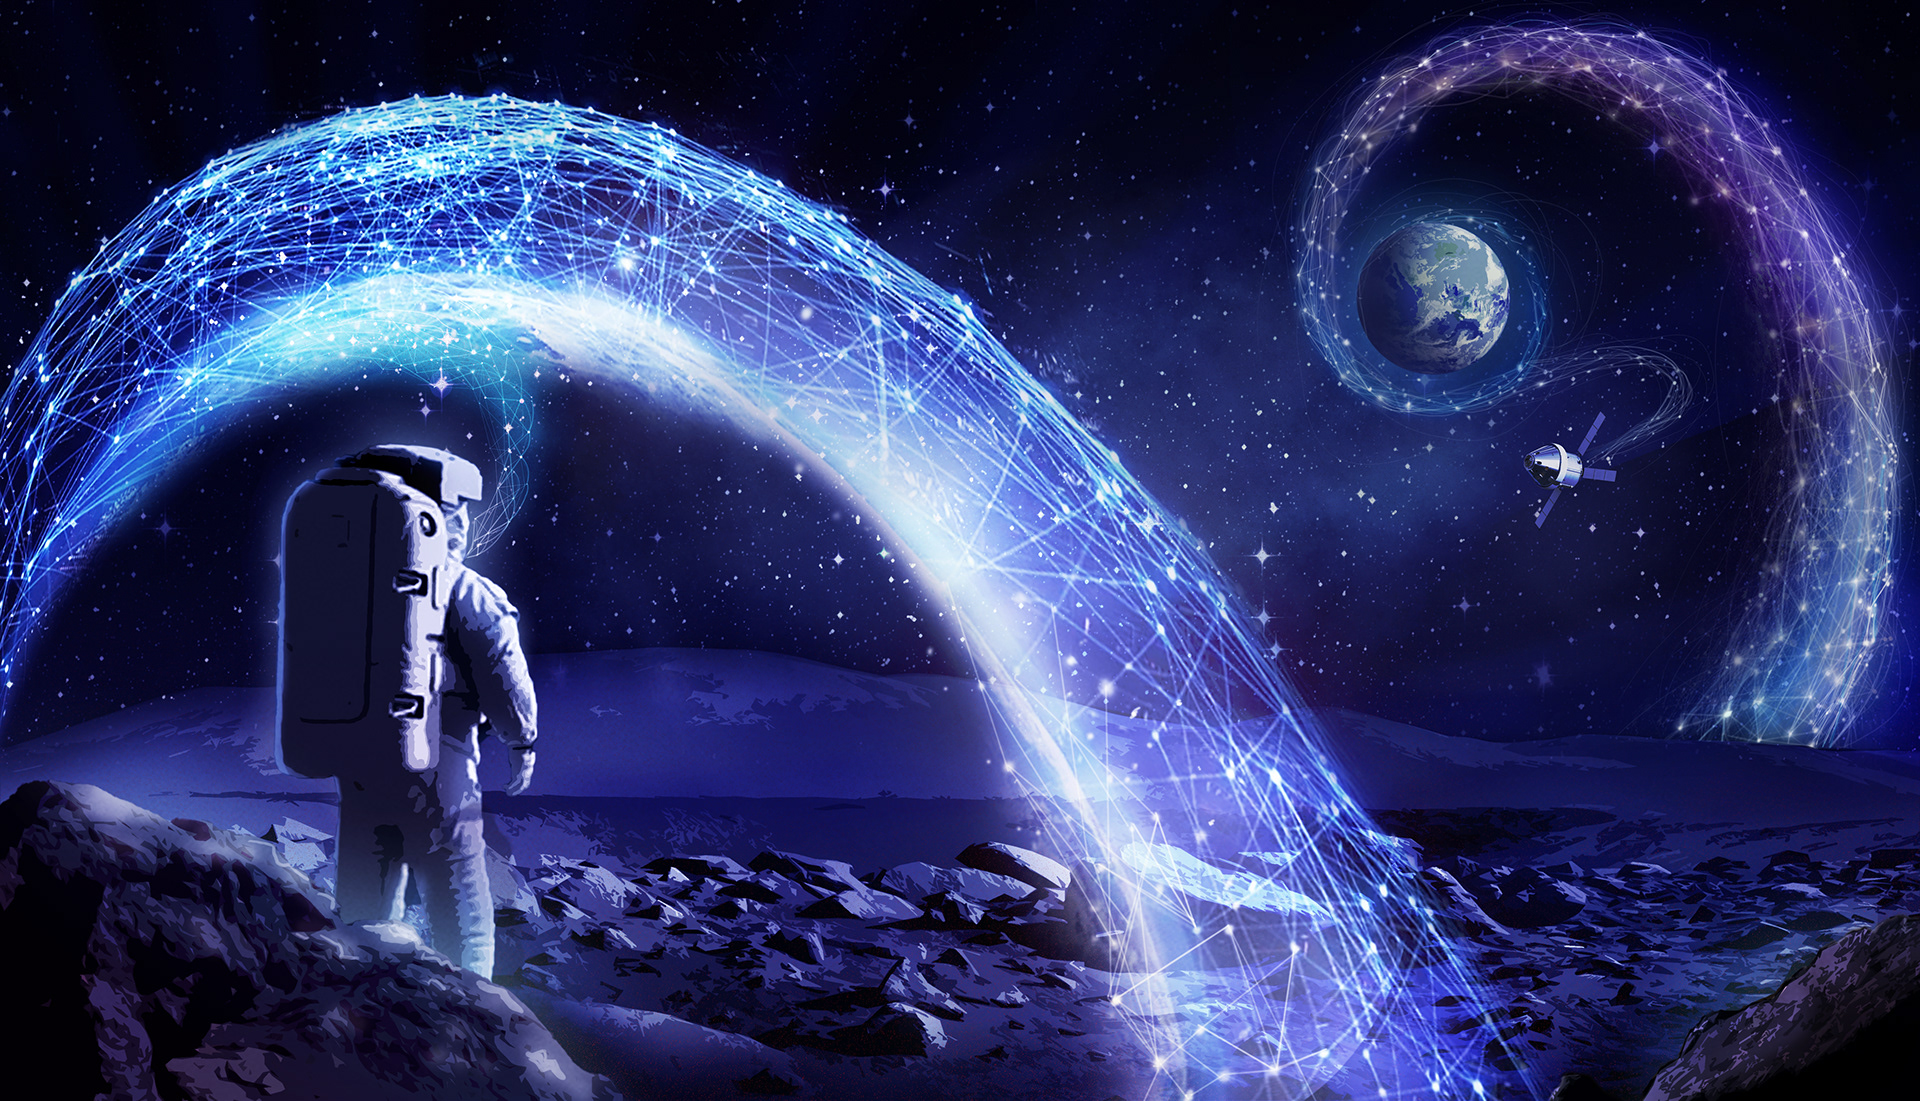 An artist's depiction of a future lunar communications network. An astronaut stands on the surface of the Moon and sends communications to an orbiting spacecraft and back to Earth.